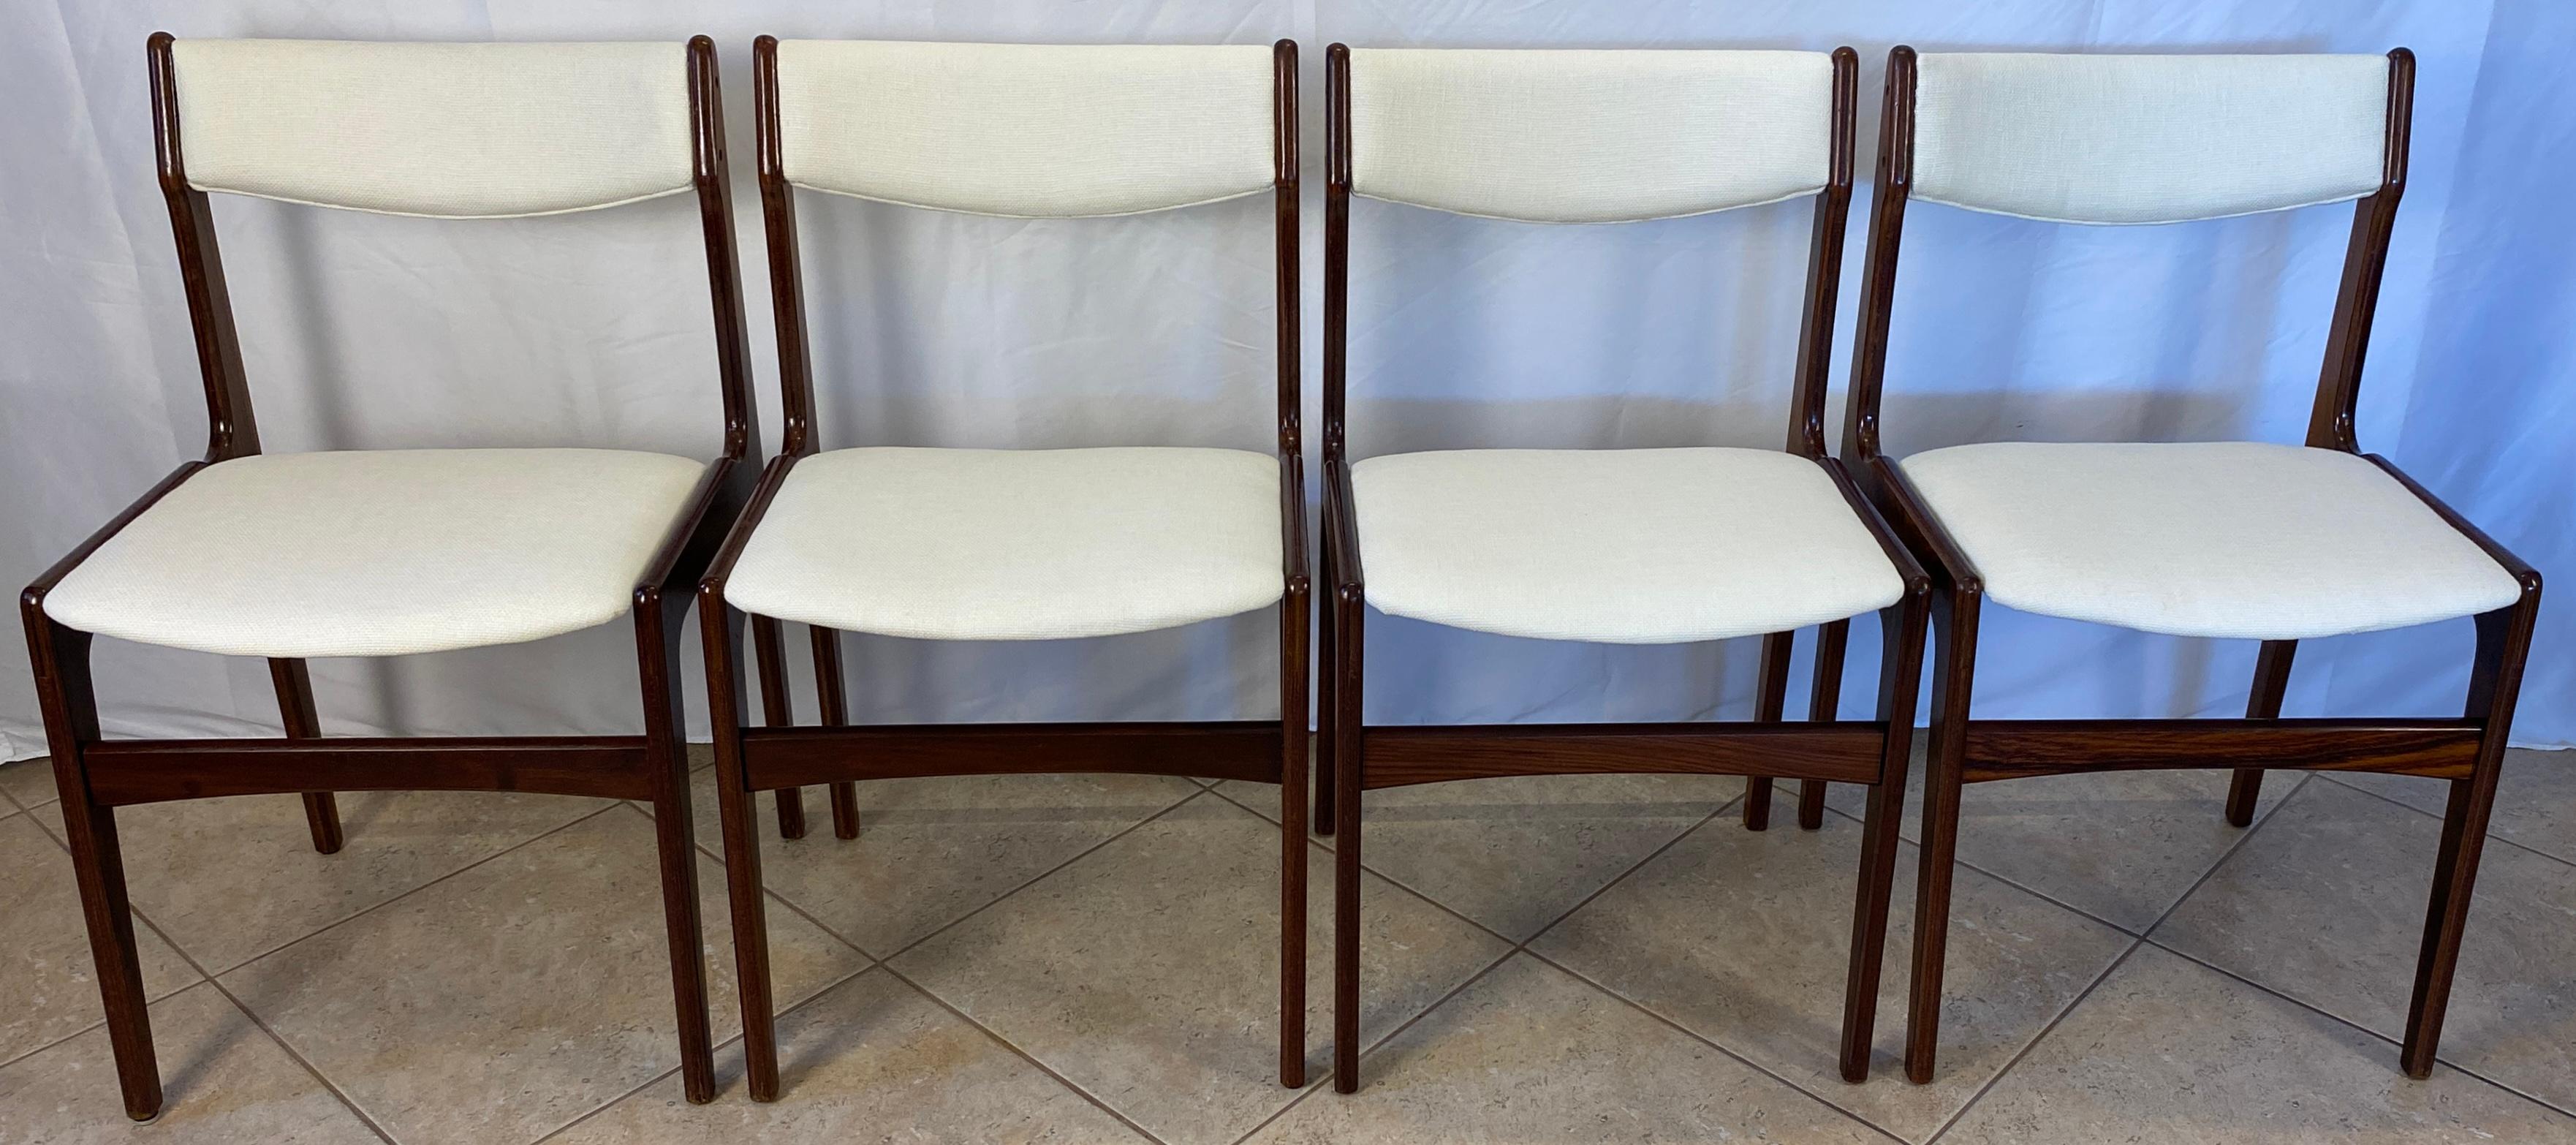 Set of 4 Mid-Century Modern Danish Dining Room Chairs  For Sale 1